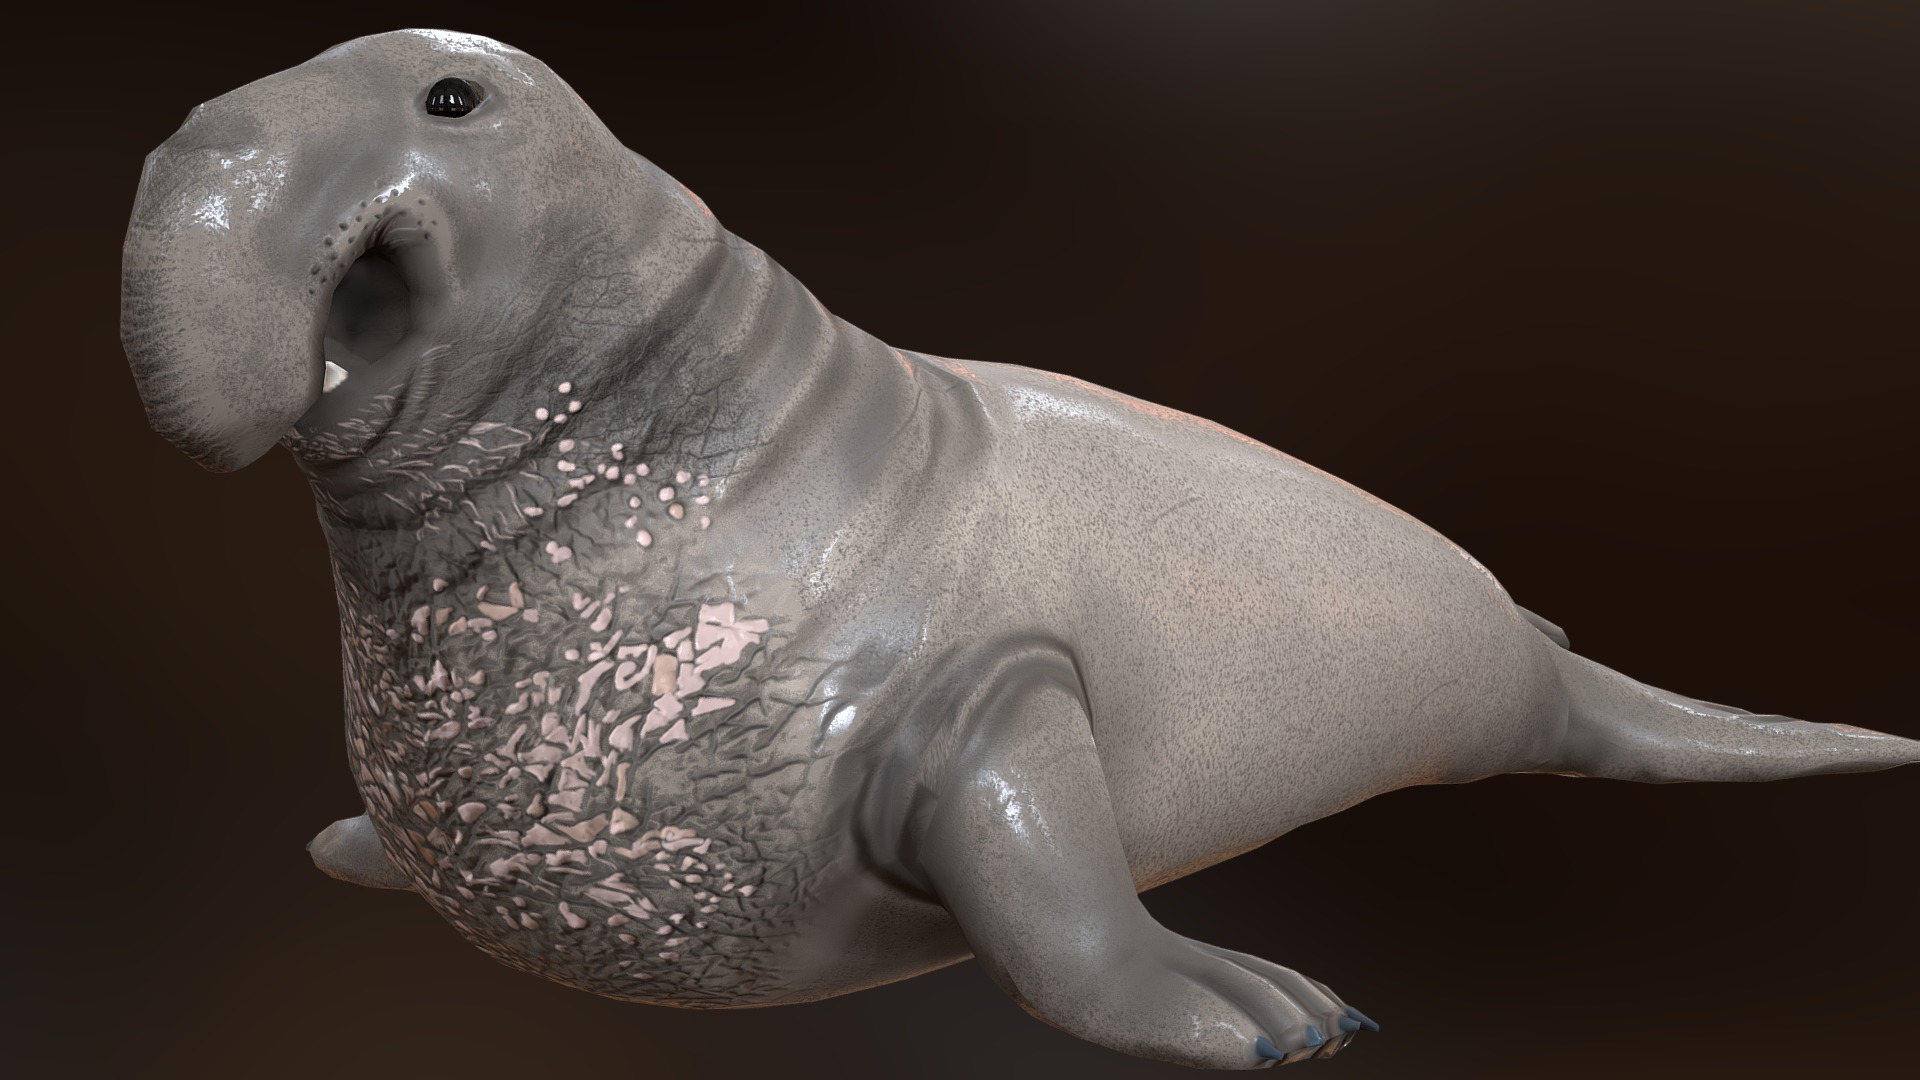 3D model Elephant Seal low poly PBR not rigged - This is a 3D model of the Elephant Seal low poly PBR not rigged. The 3D model is about a close-up of a sea animal.